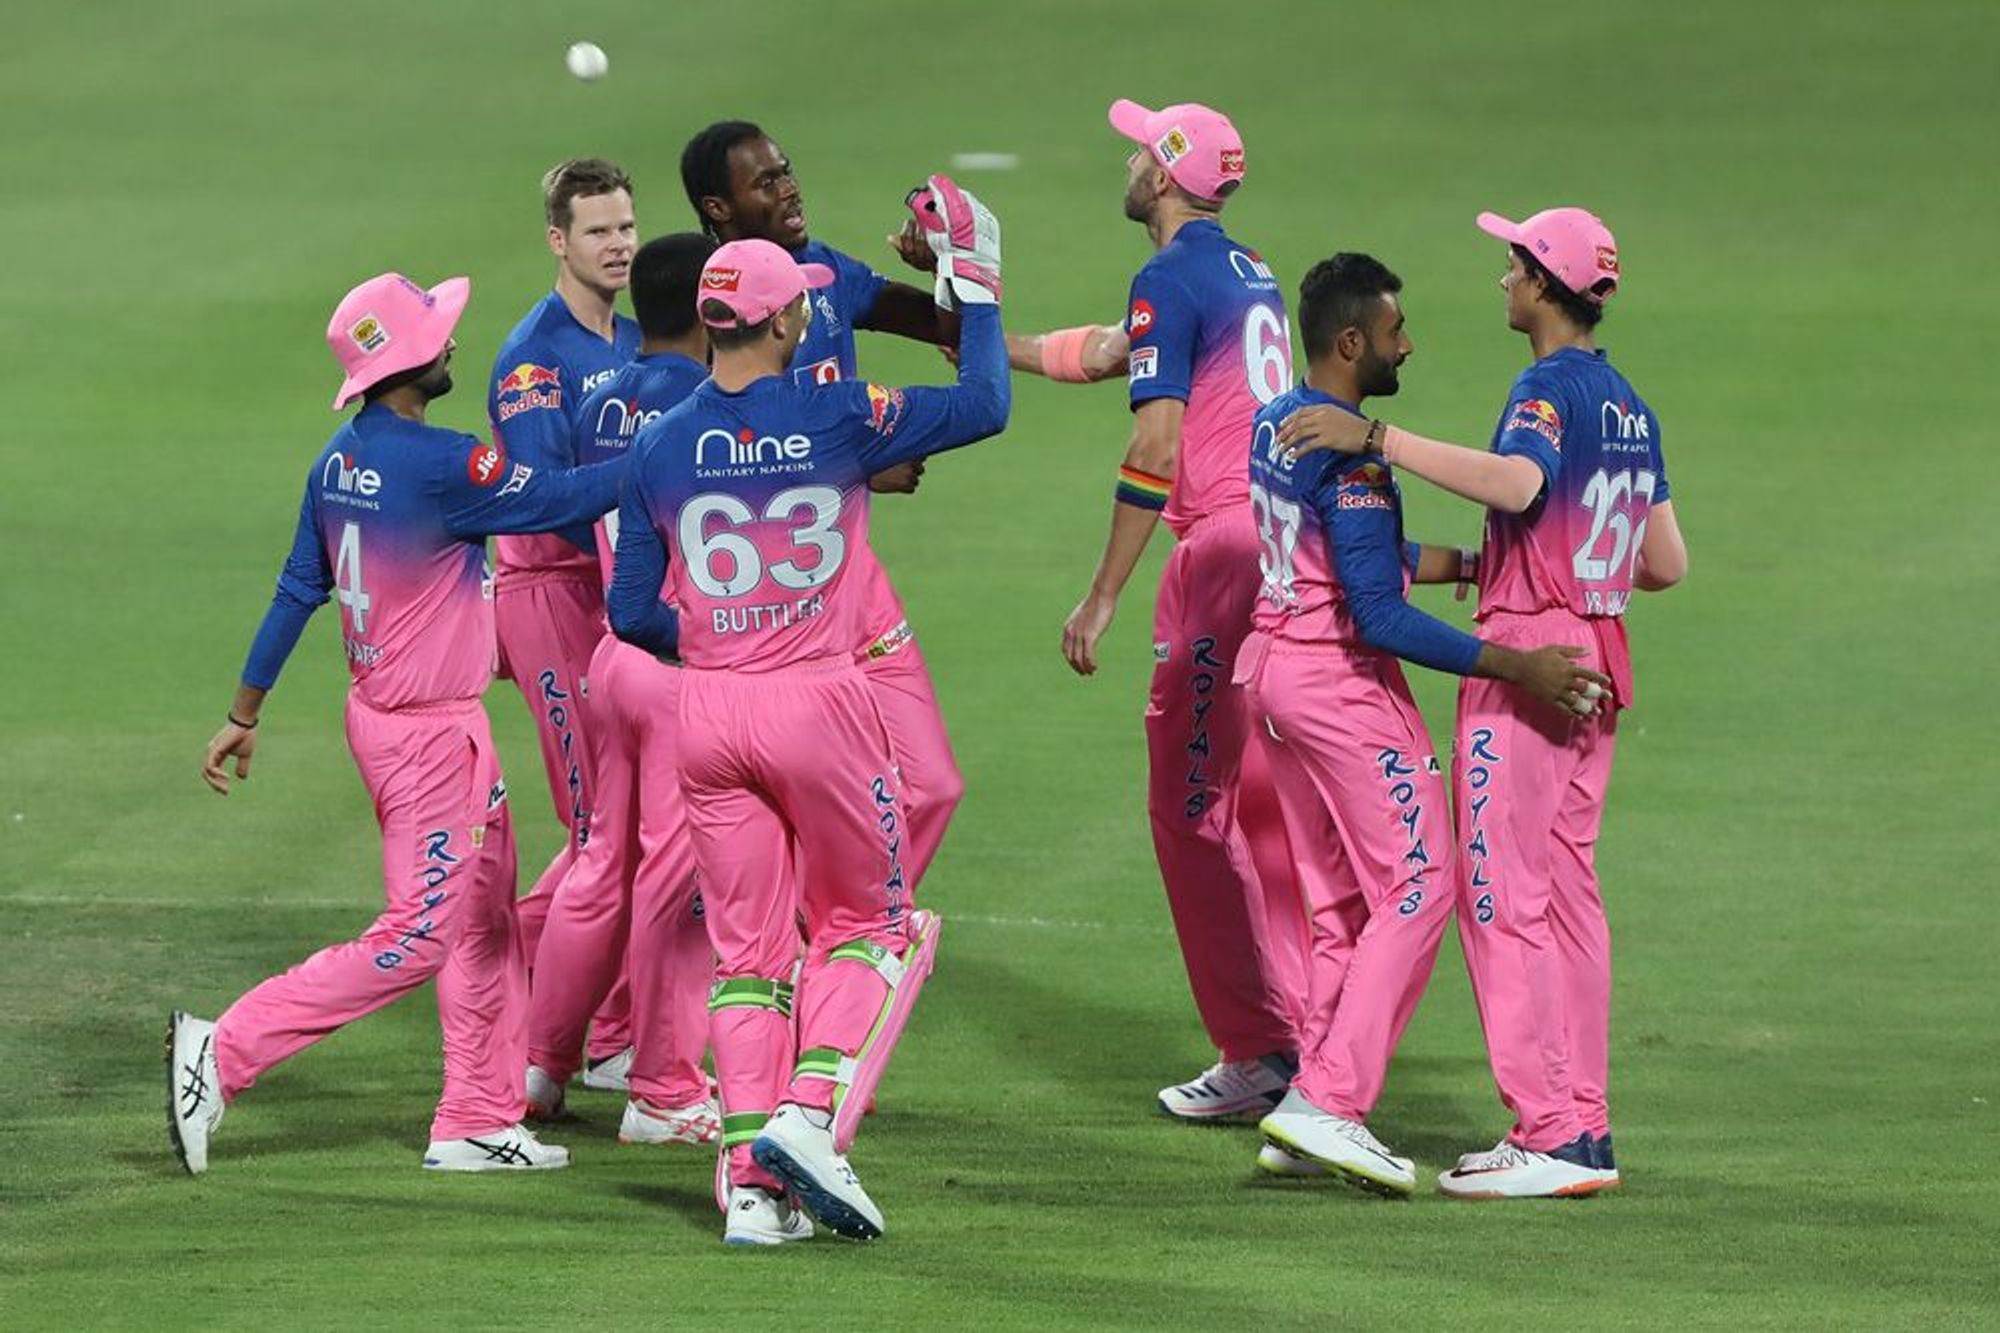 IPL 2021 Auction | Rajasthan Royals - Dream, realistic, wildcard, and suggested buys